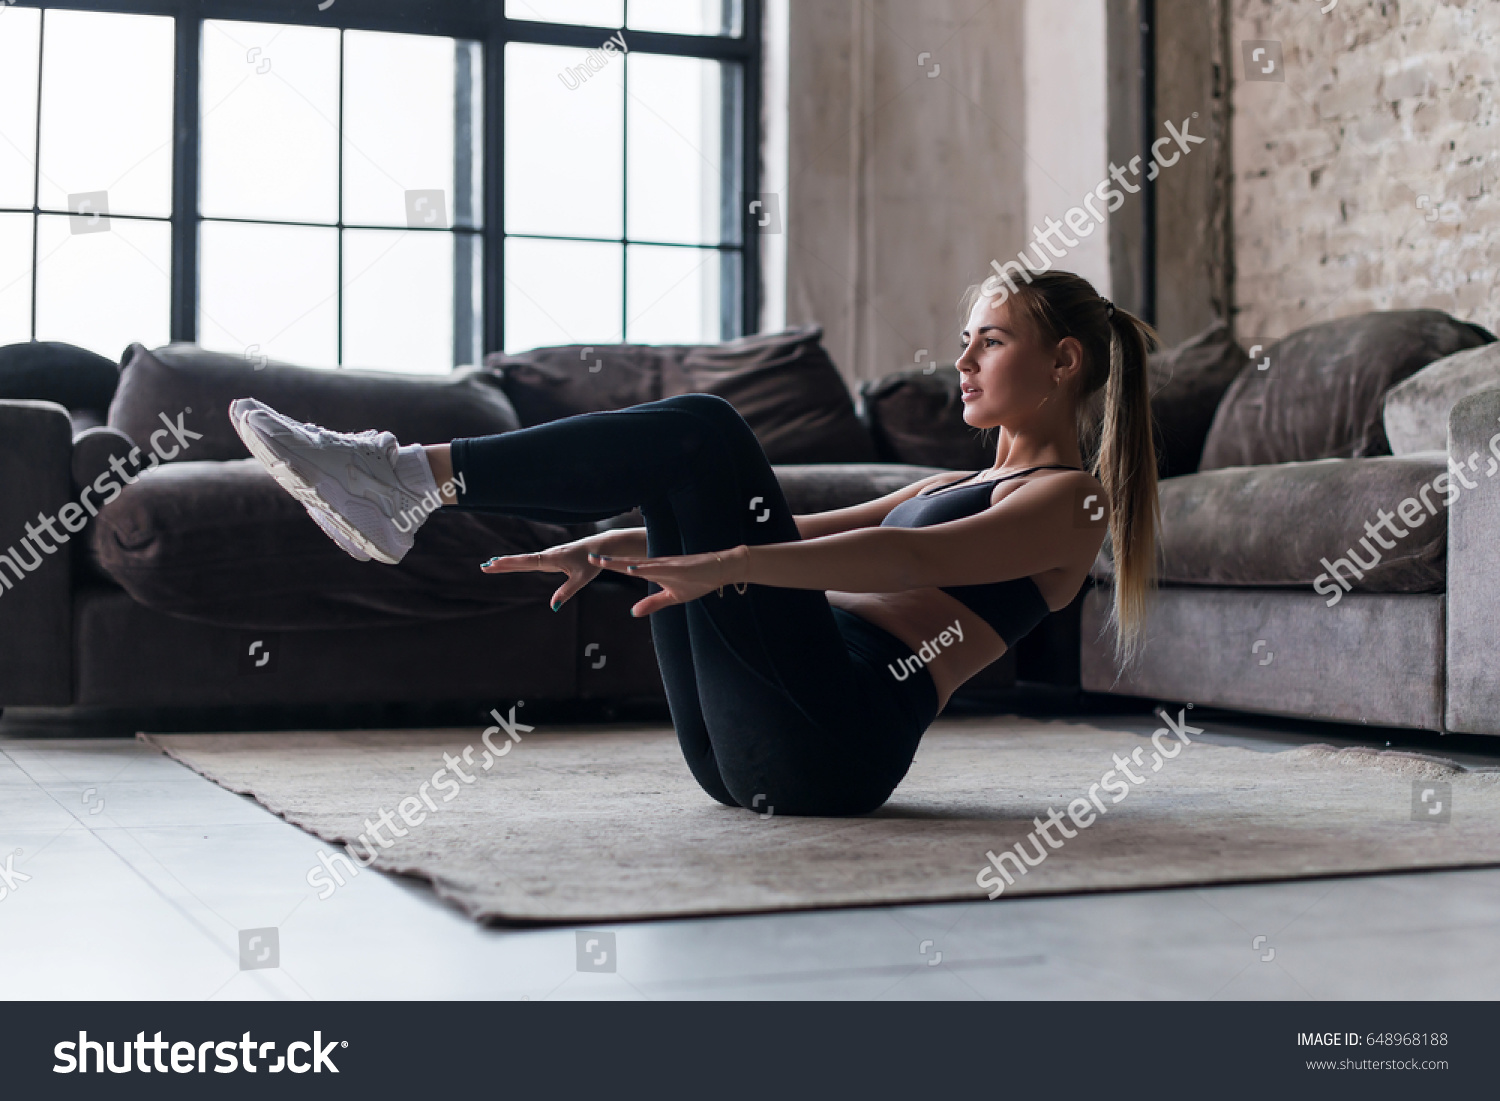 Slim sporty girl doing v-ups abs workout at home #648968188